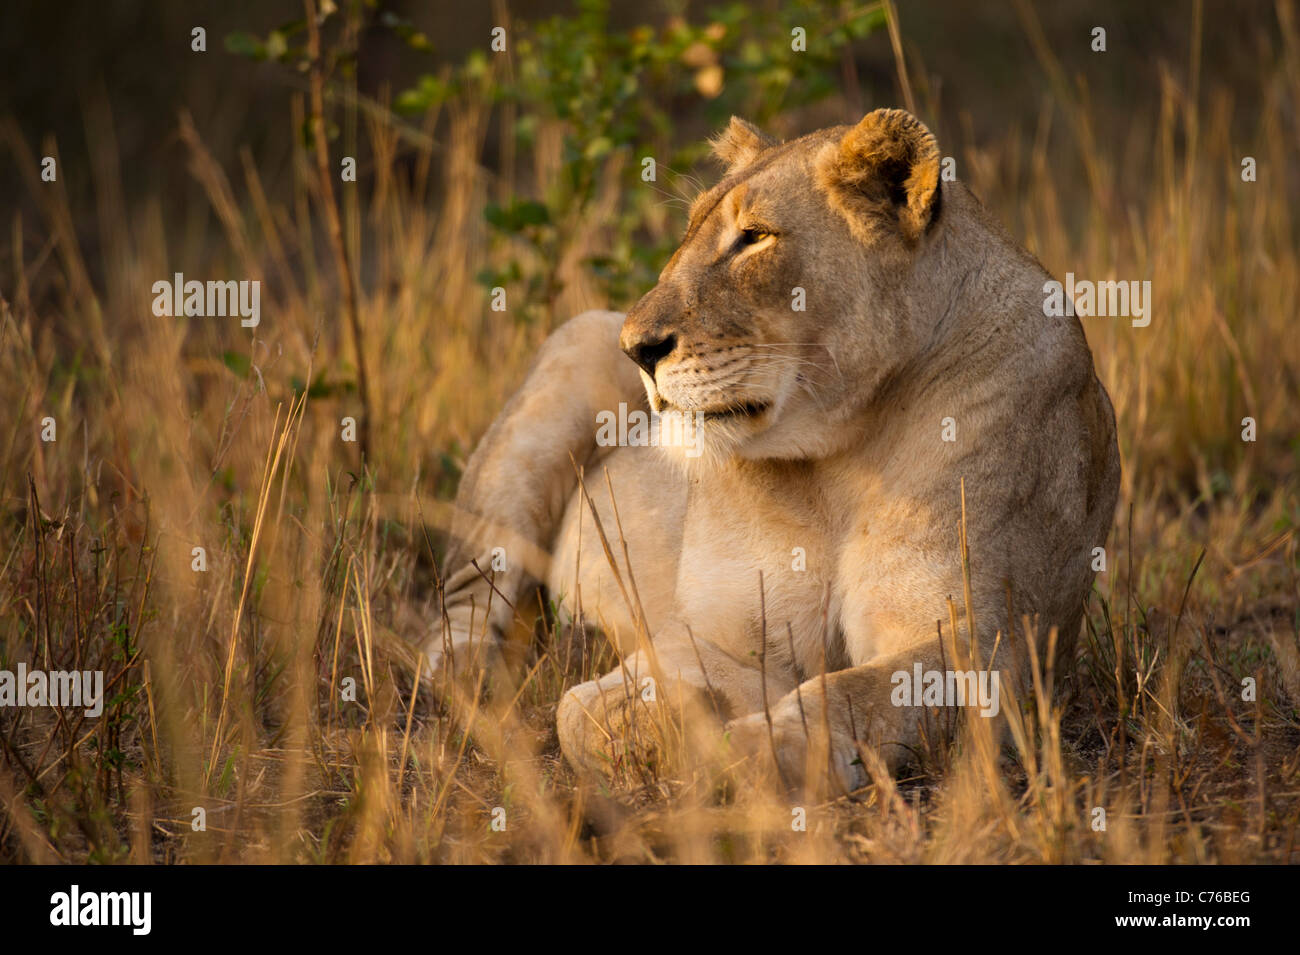 Lion (Panthero leo), Phinda Game Reserve, South Africa Stock Photo